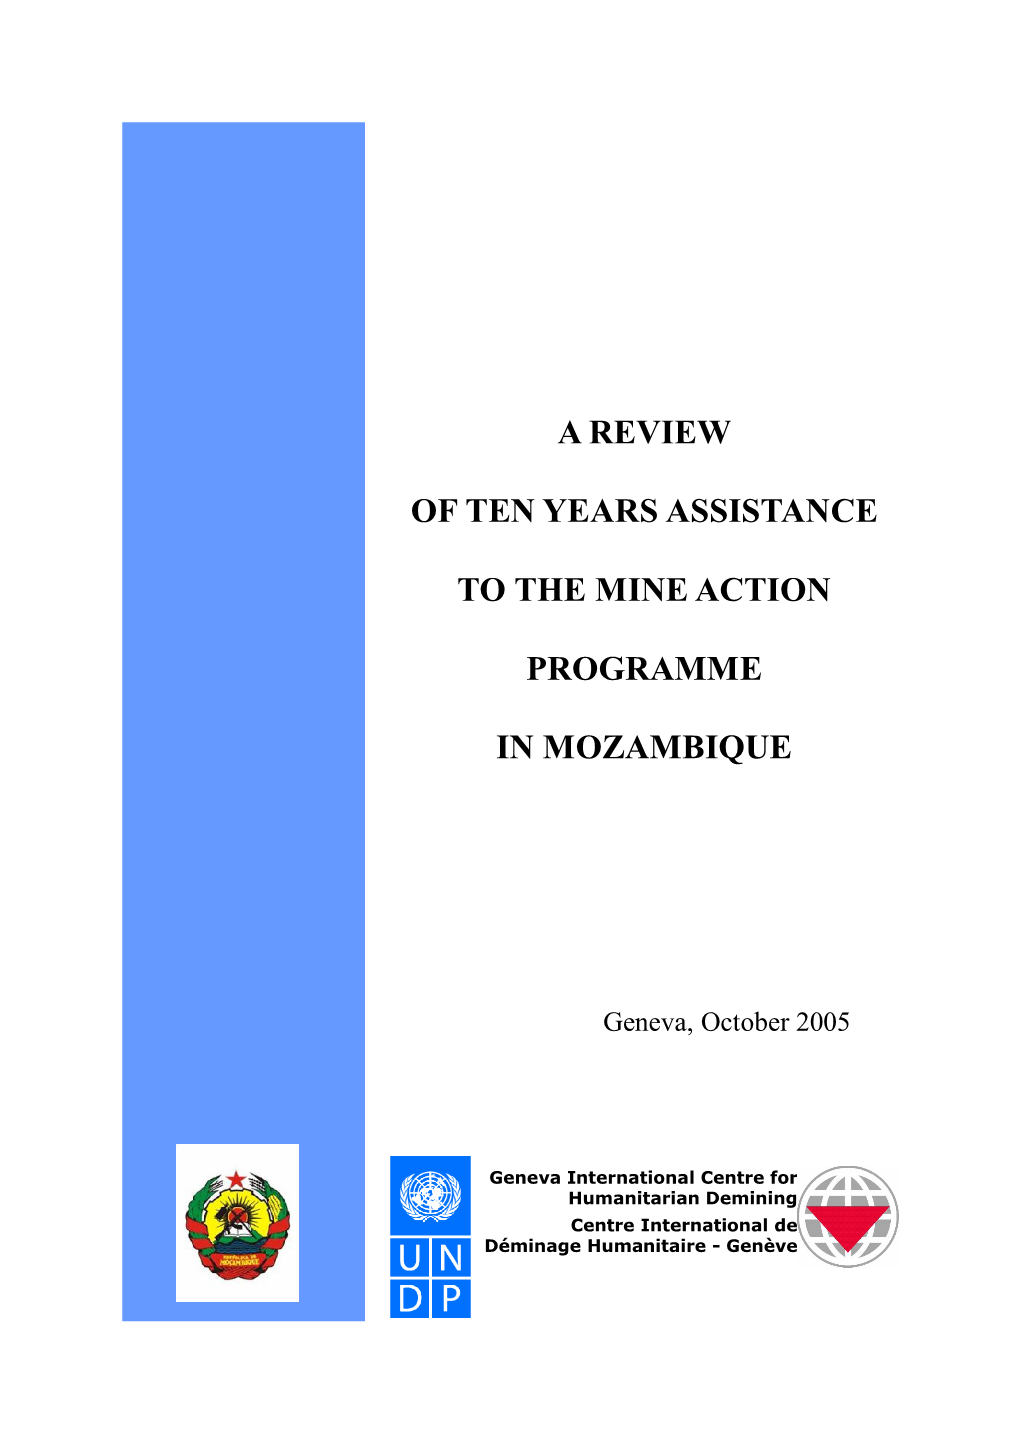 A Review of Ten Years Assistance to the Mine Action